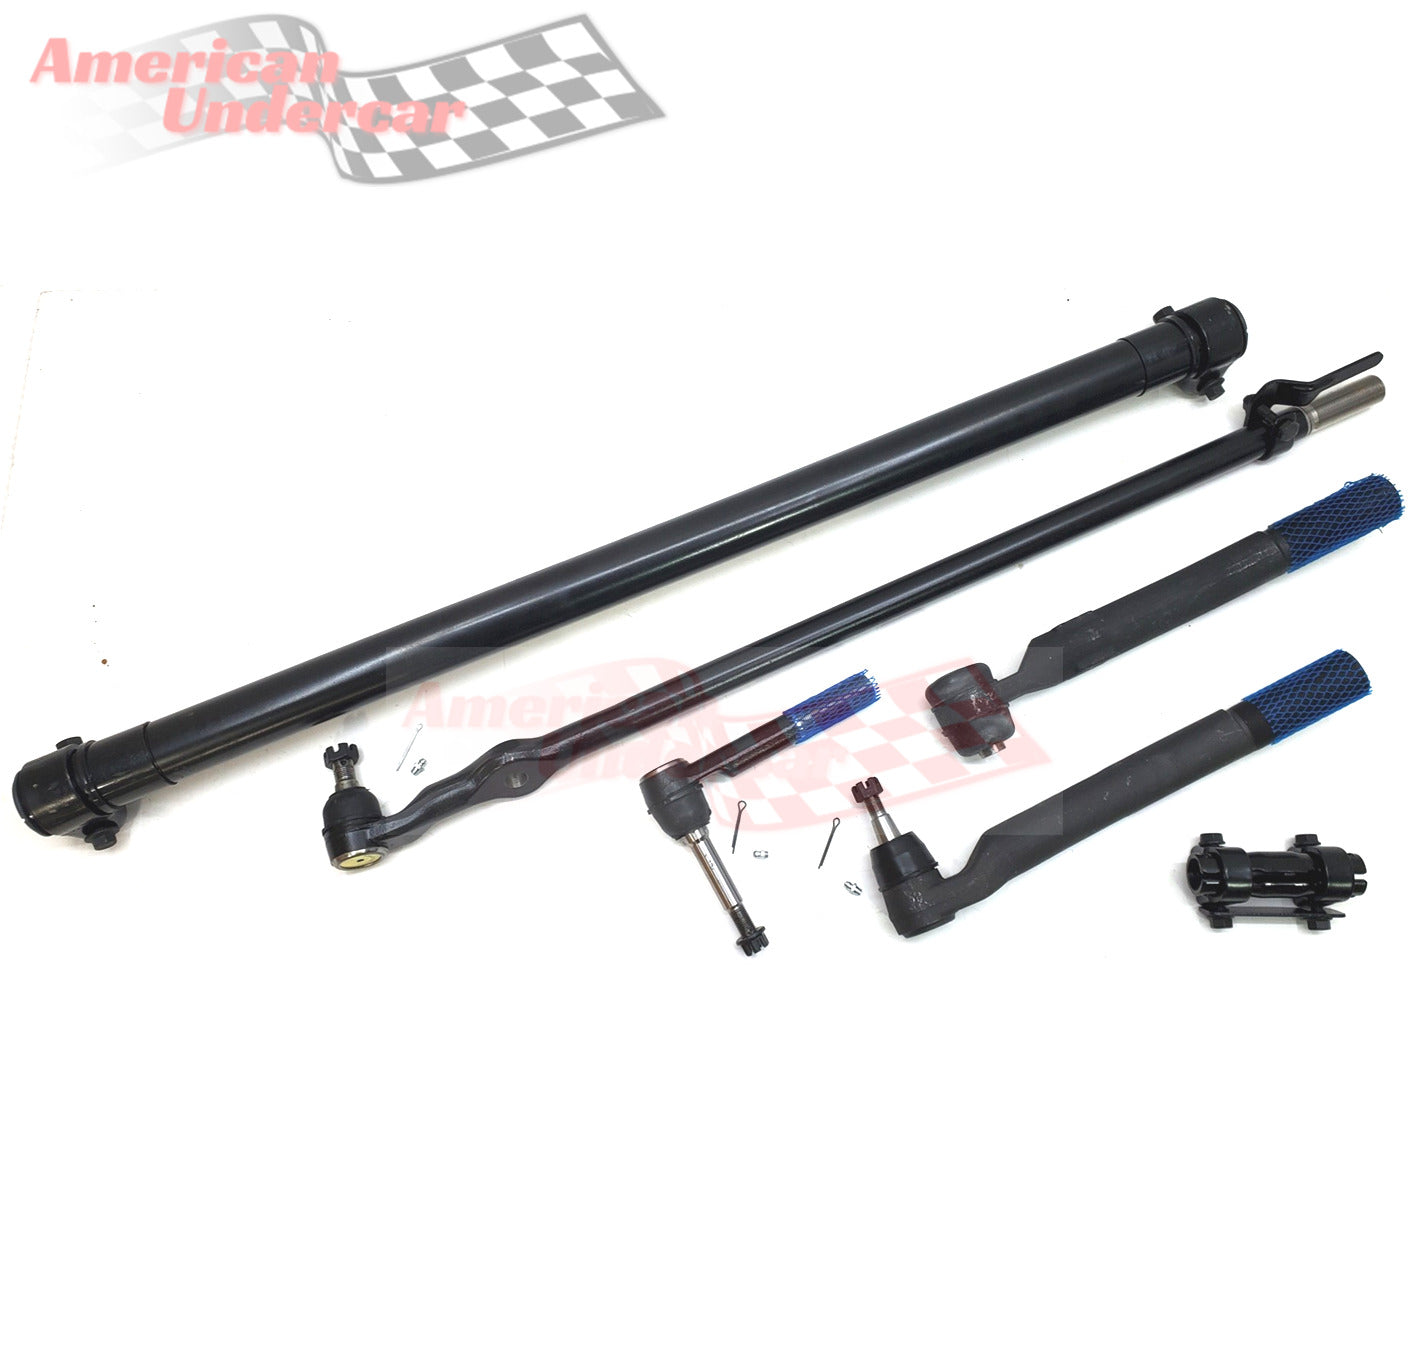 HD Drag Link Steering and Suspension Kit for 2011-2016 Ford F550 Super Duty 2WD